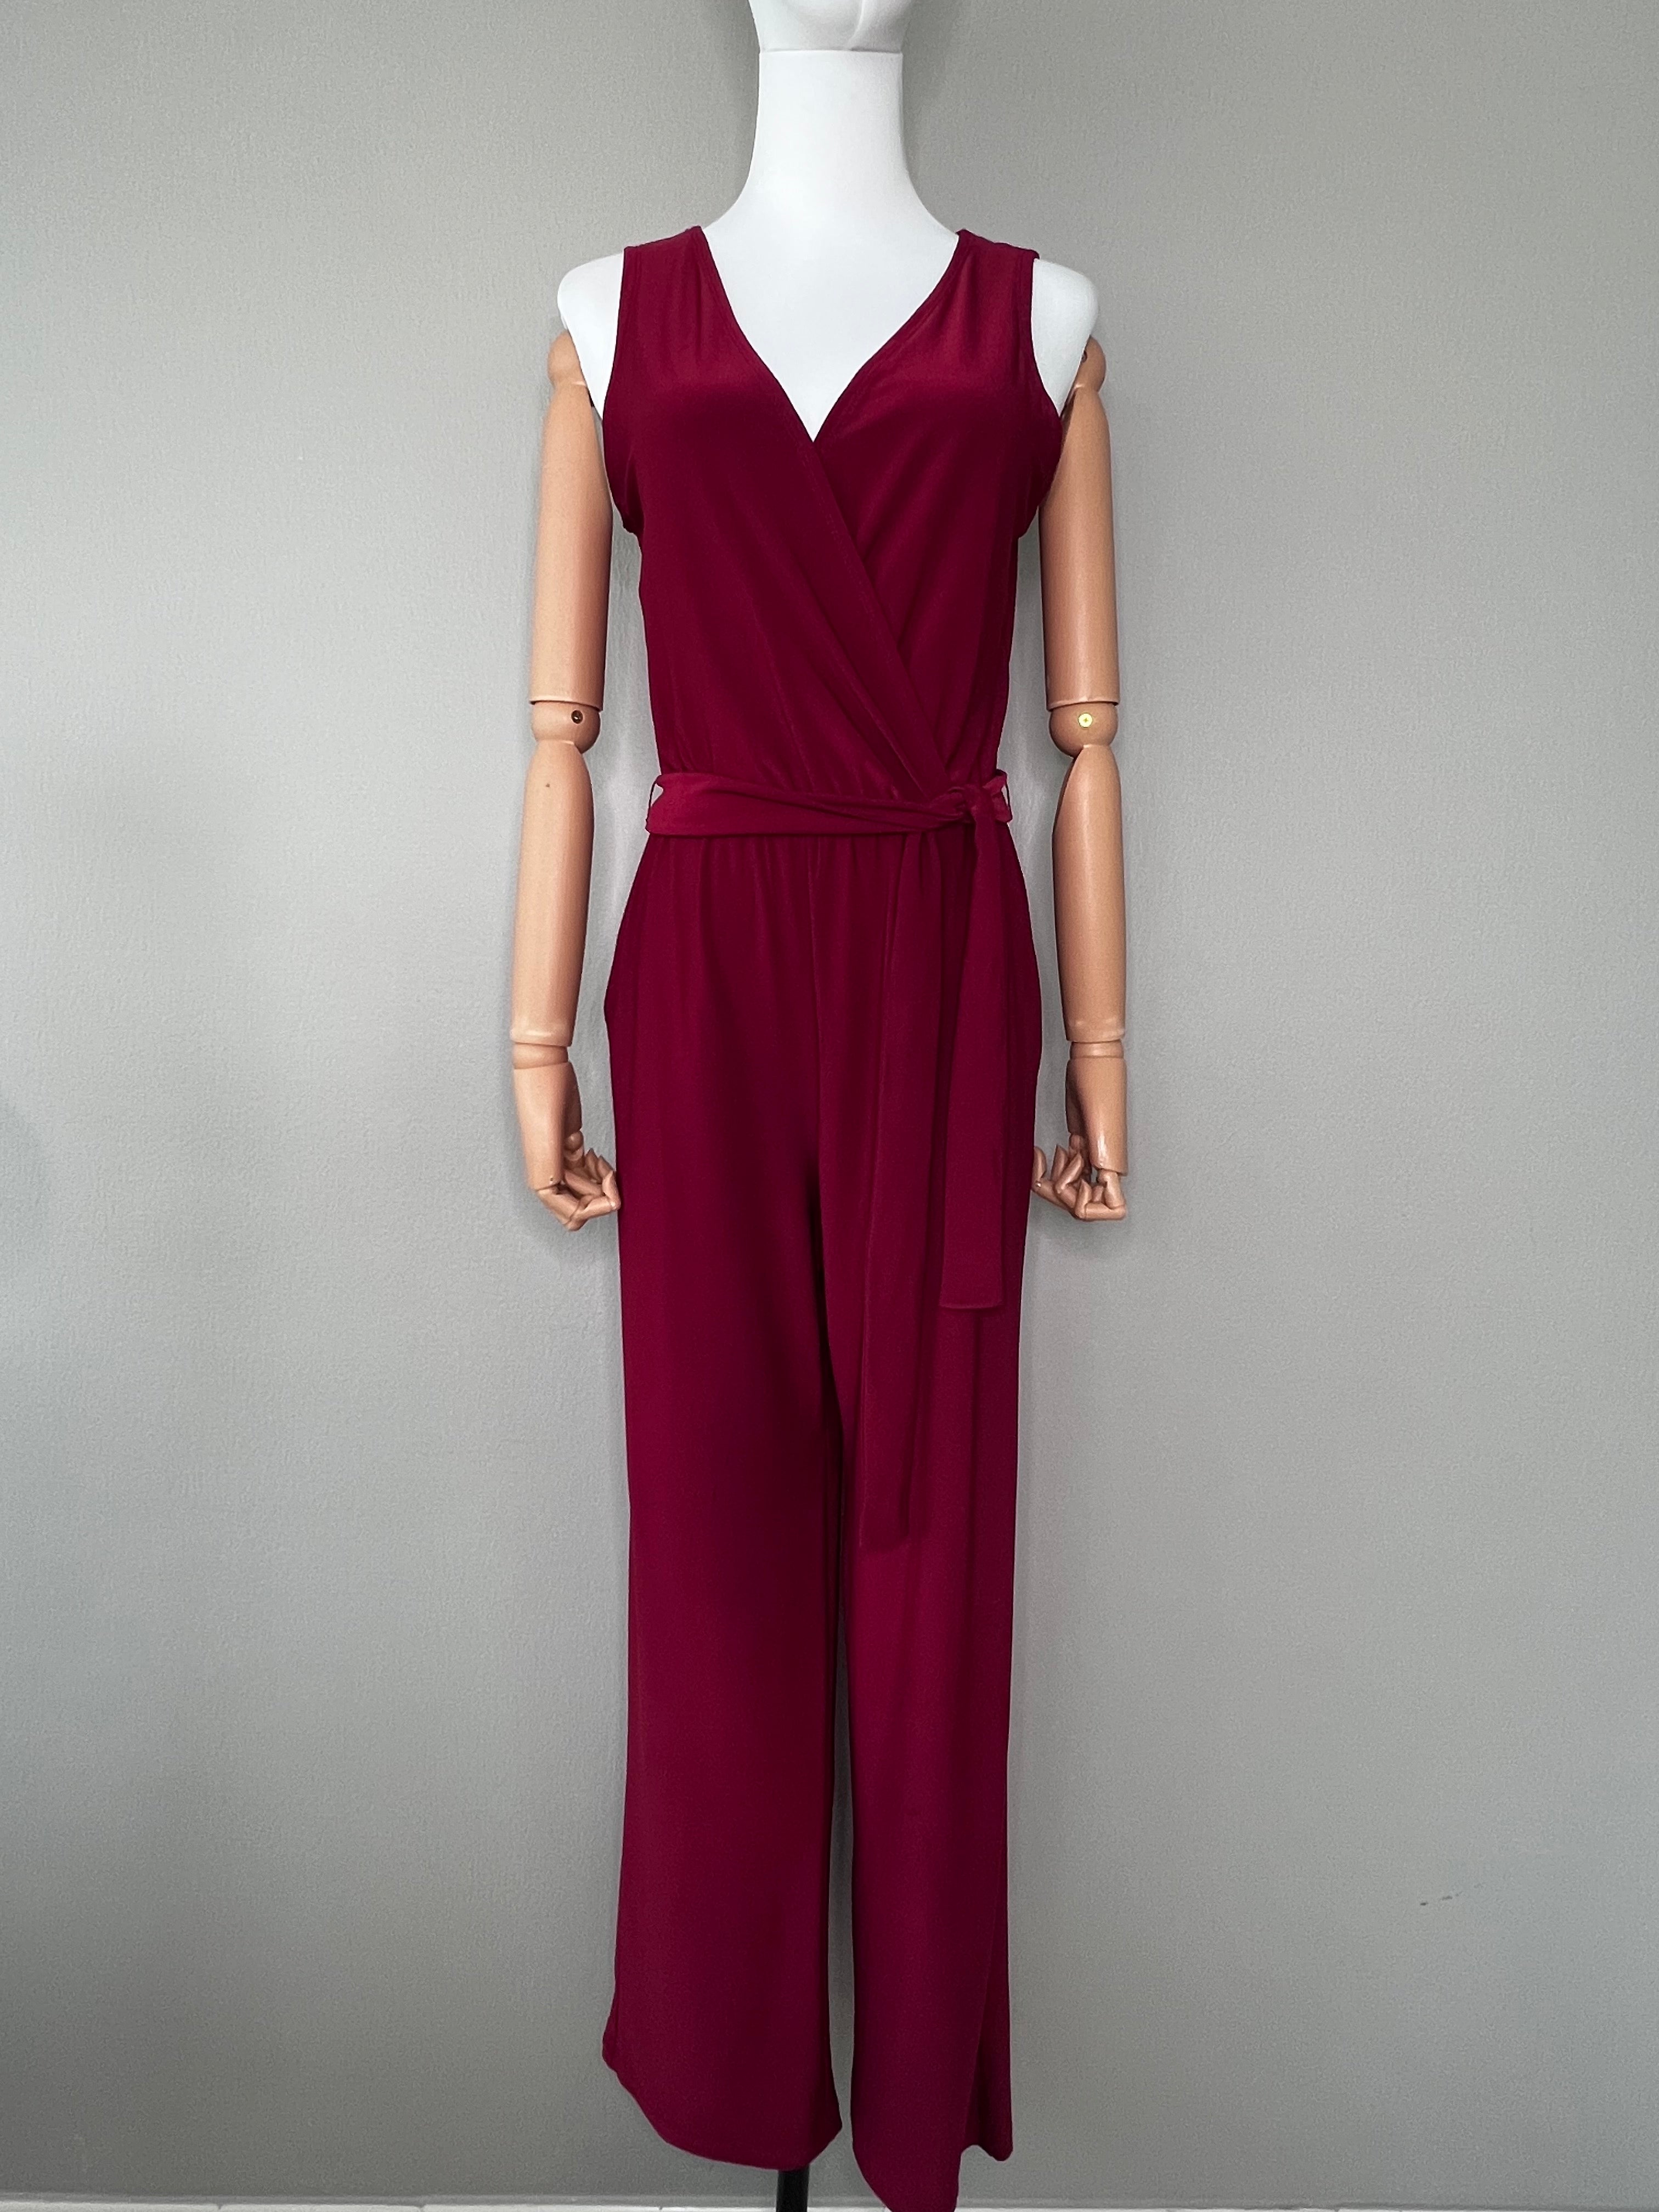 Maroon Sleevless Jumpsuit with Belt and side pocket - NY Collection petite